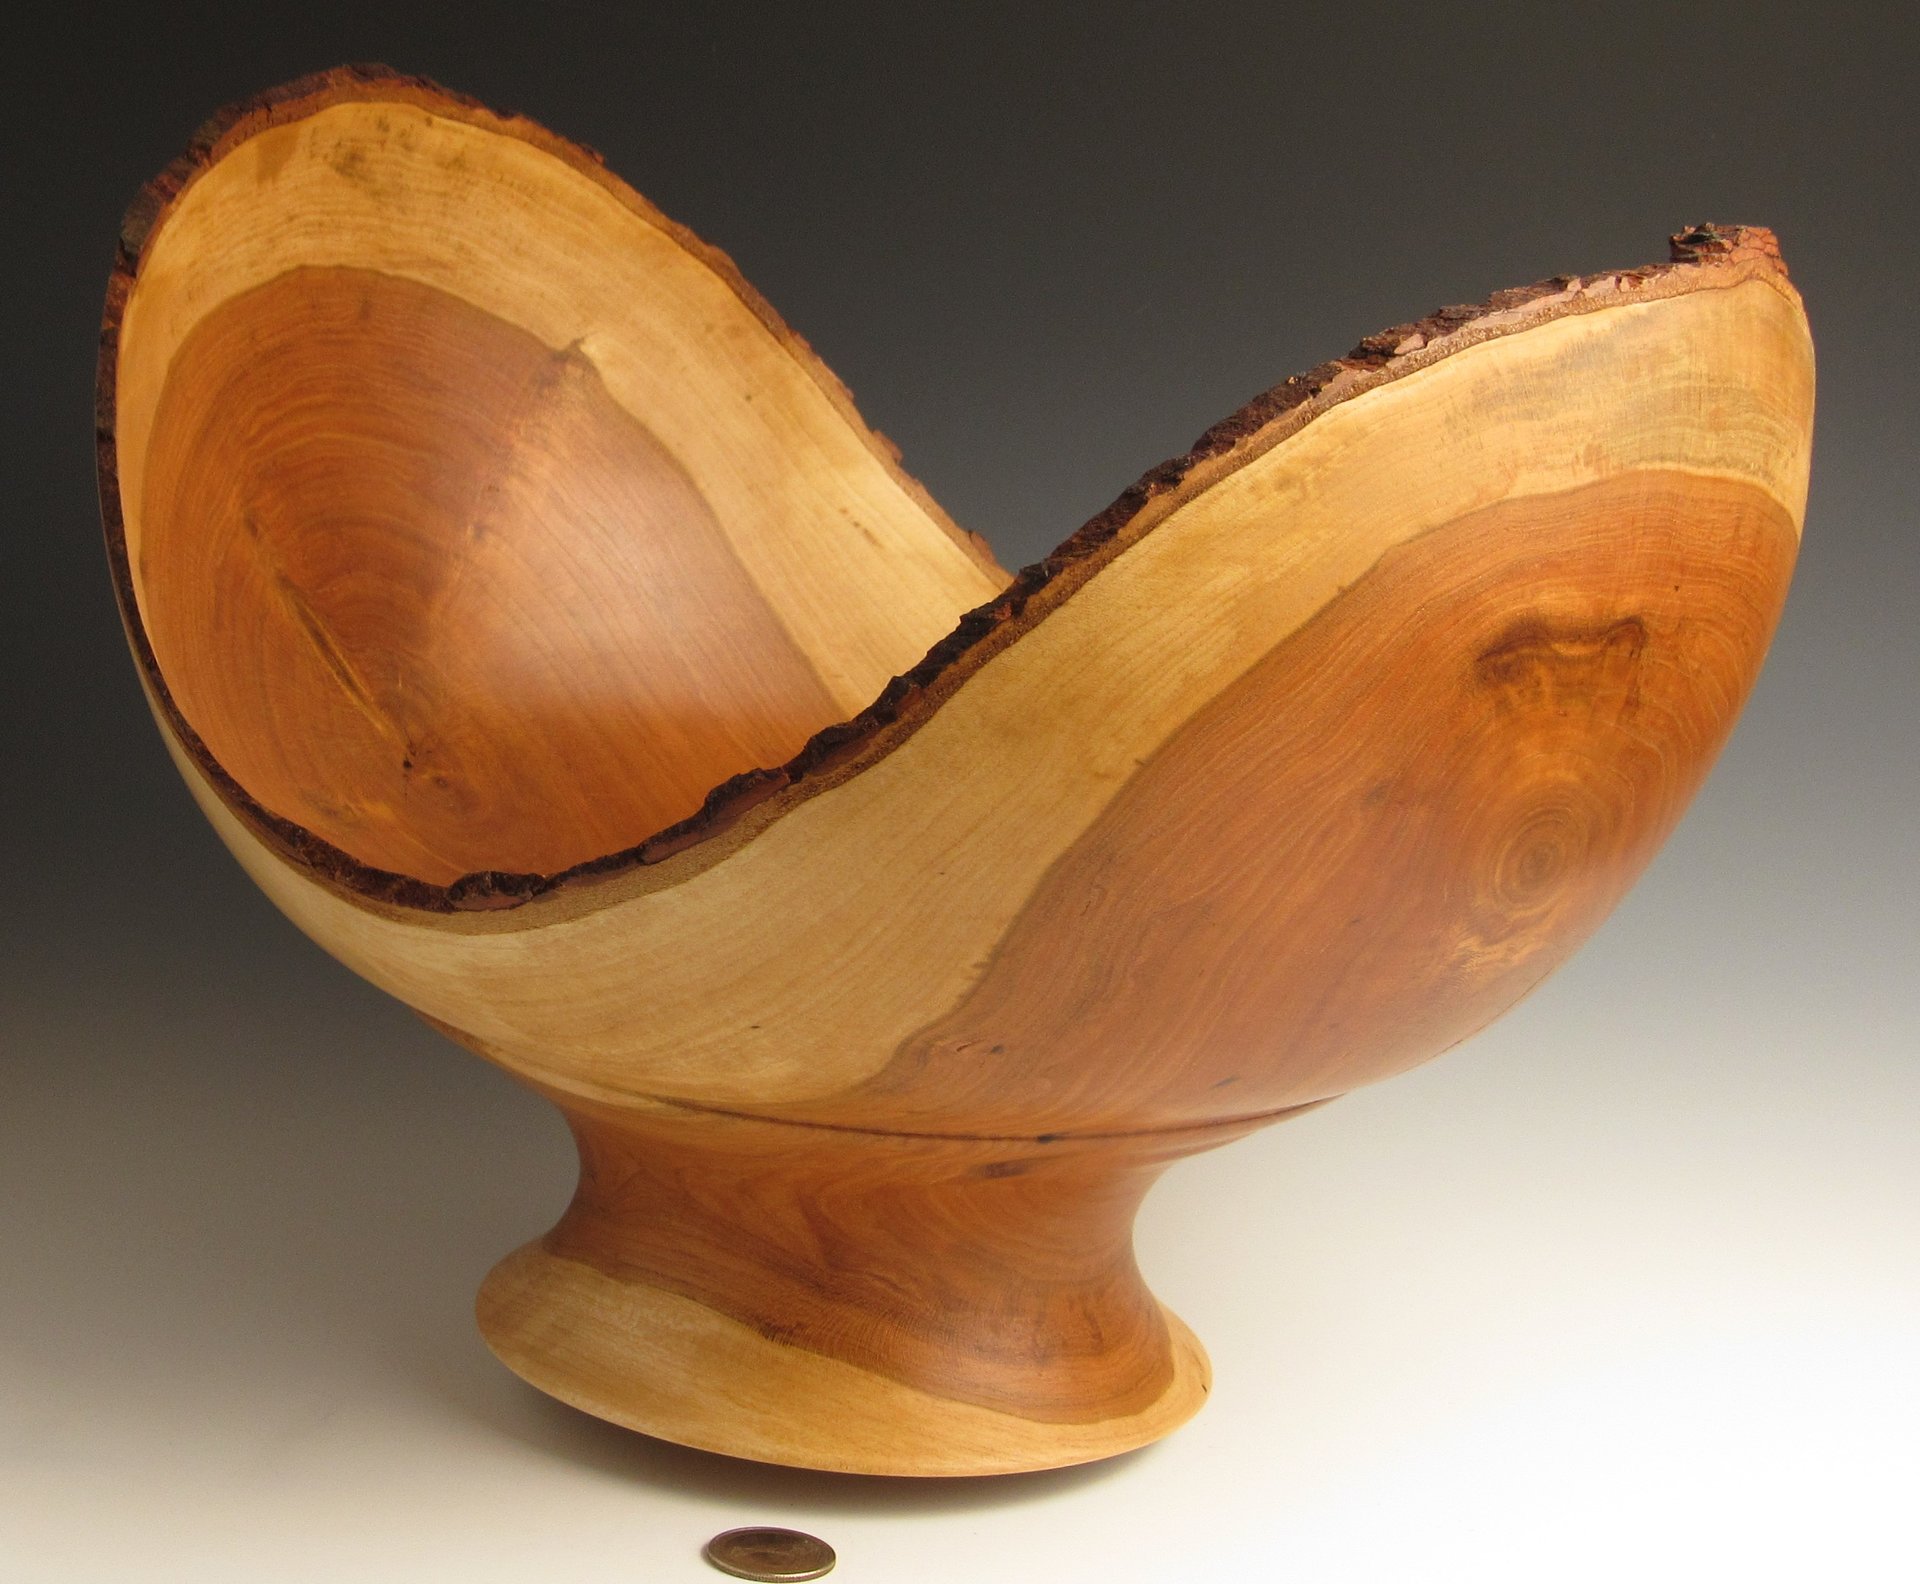 Bowl from a Log